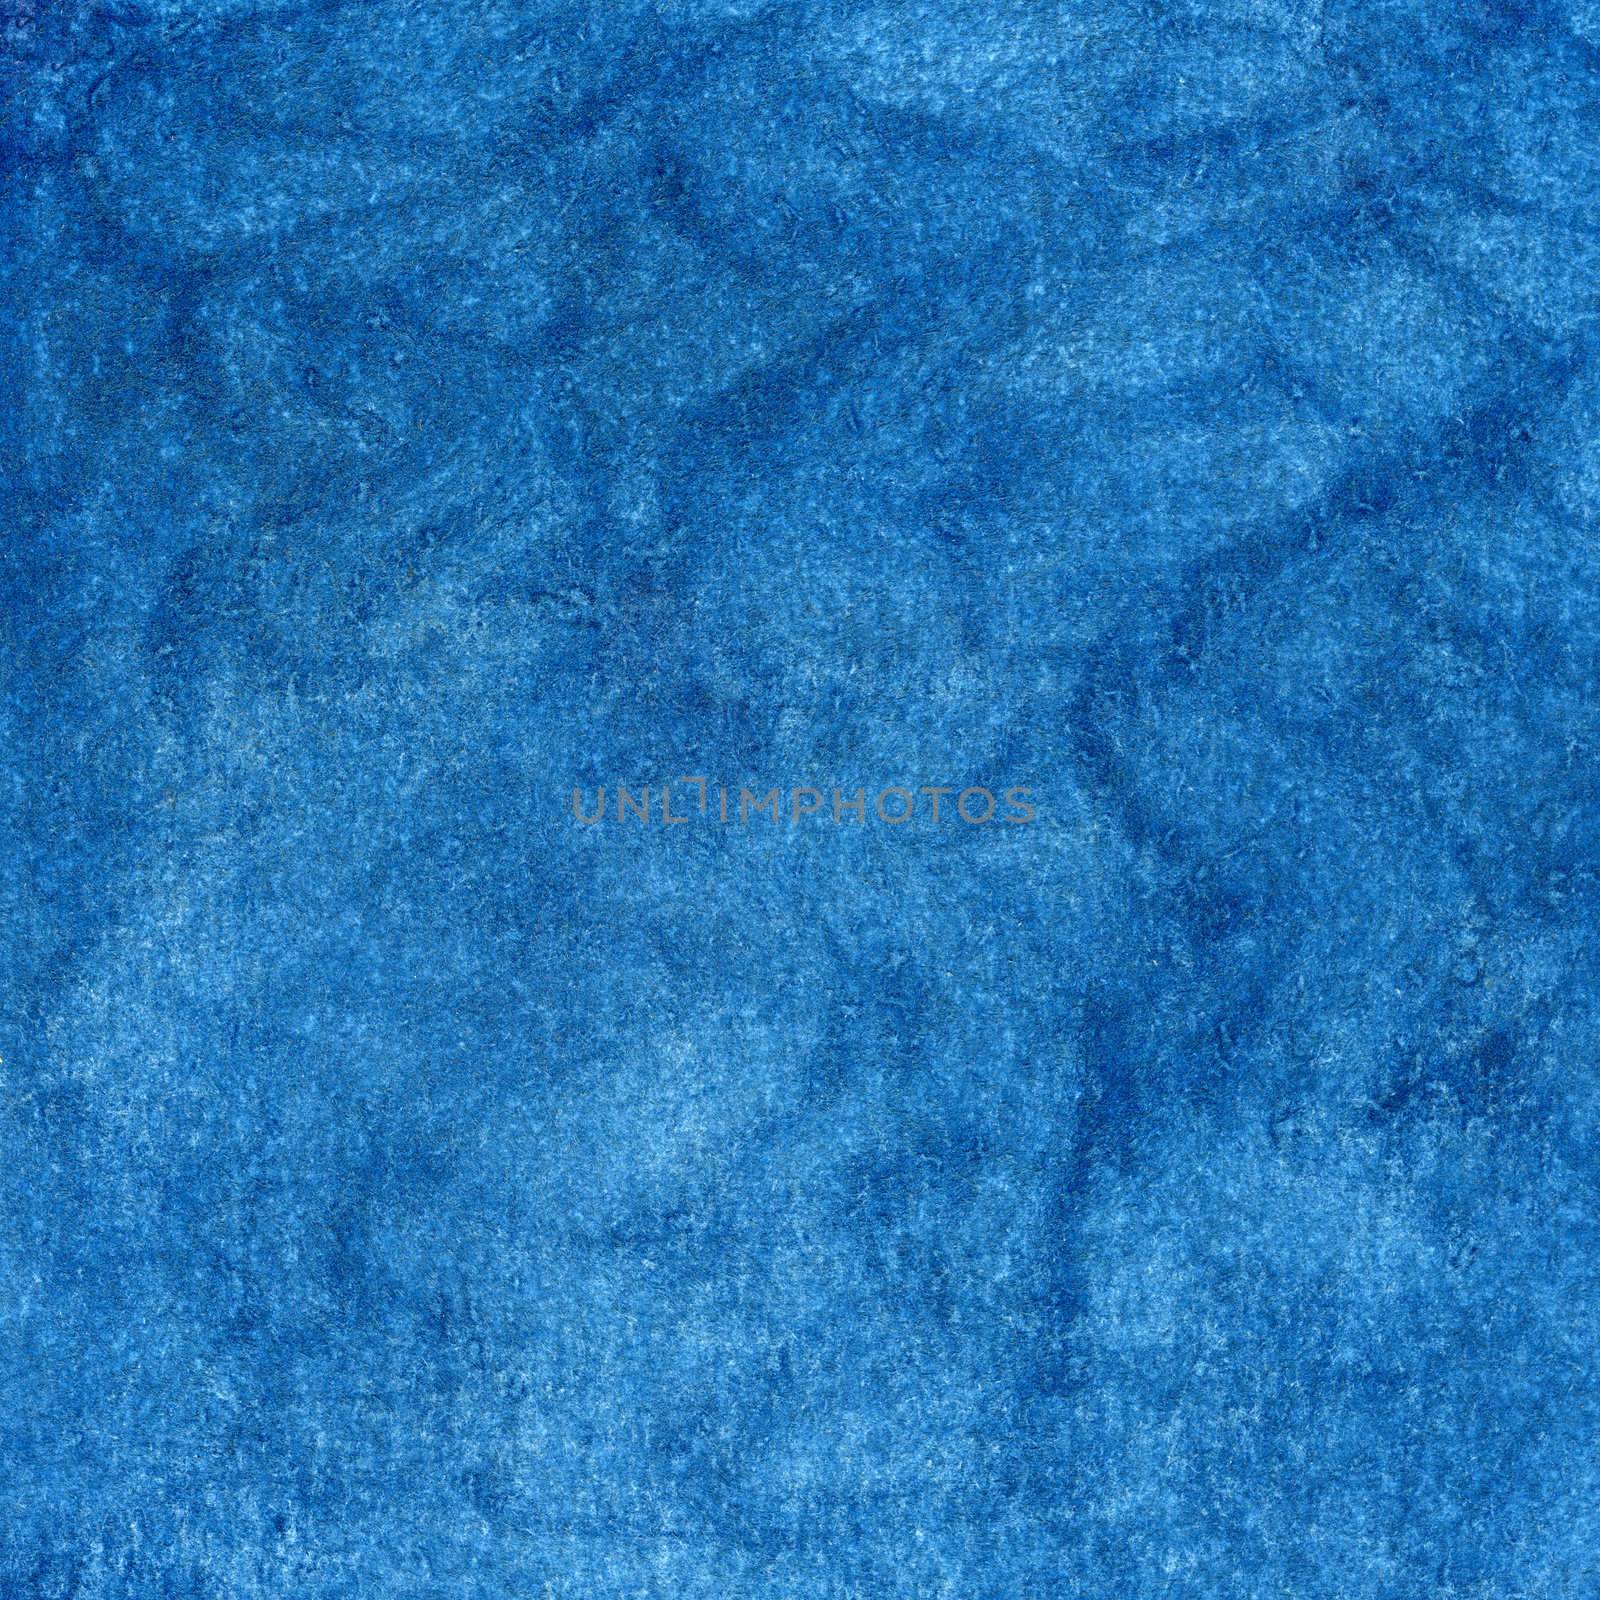 blue watercolor painted abstract with scratch paper texture, self made